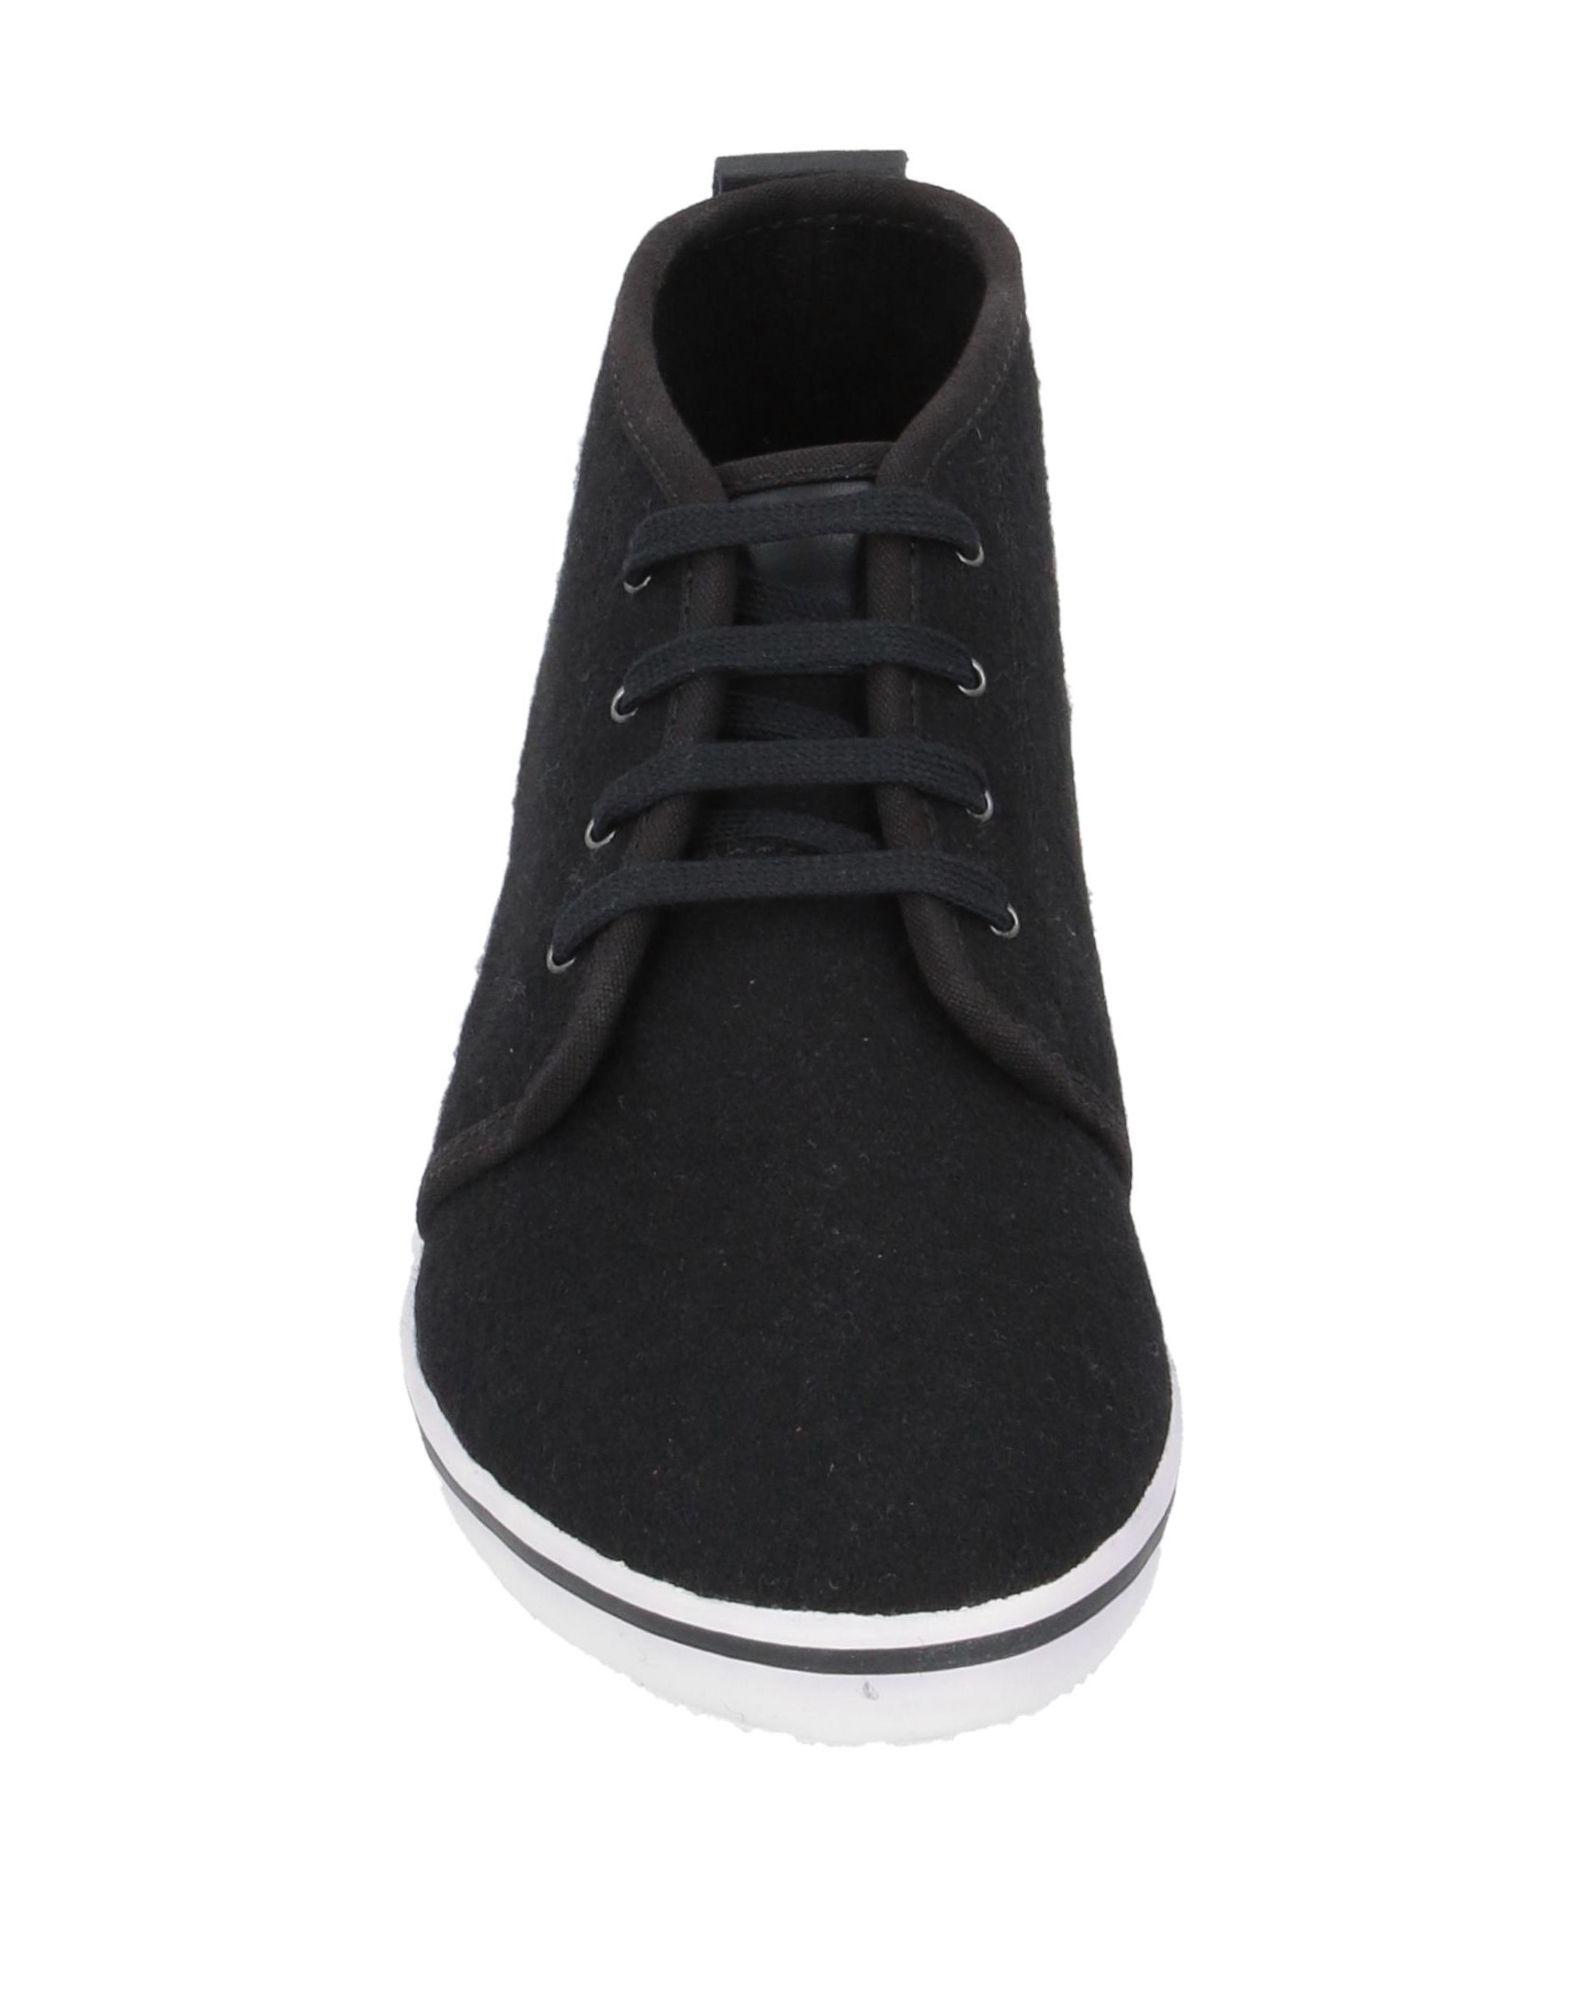 Fred Perry Flannel High-tops & Sneakers in Black - Lyst